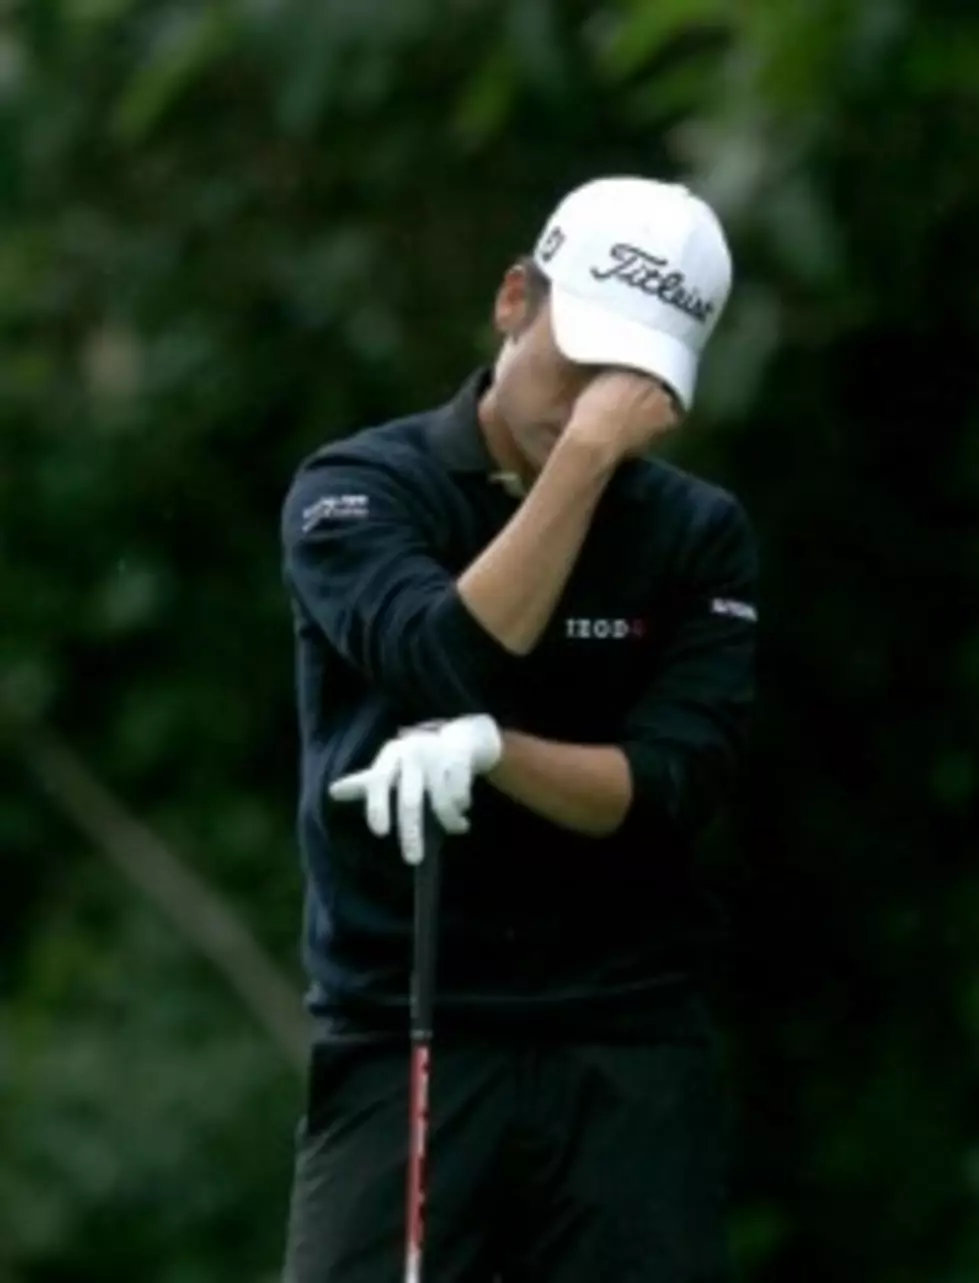 Pro Golfer Sets Record With 16 Shots on One Hole